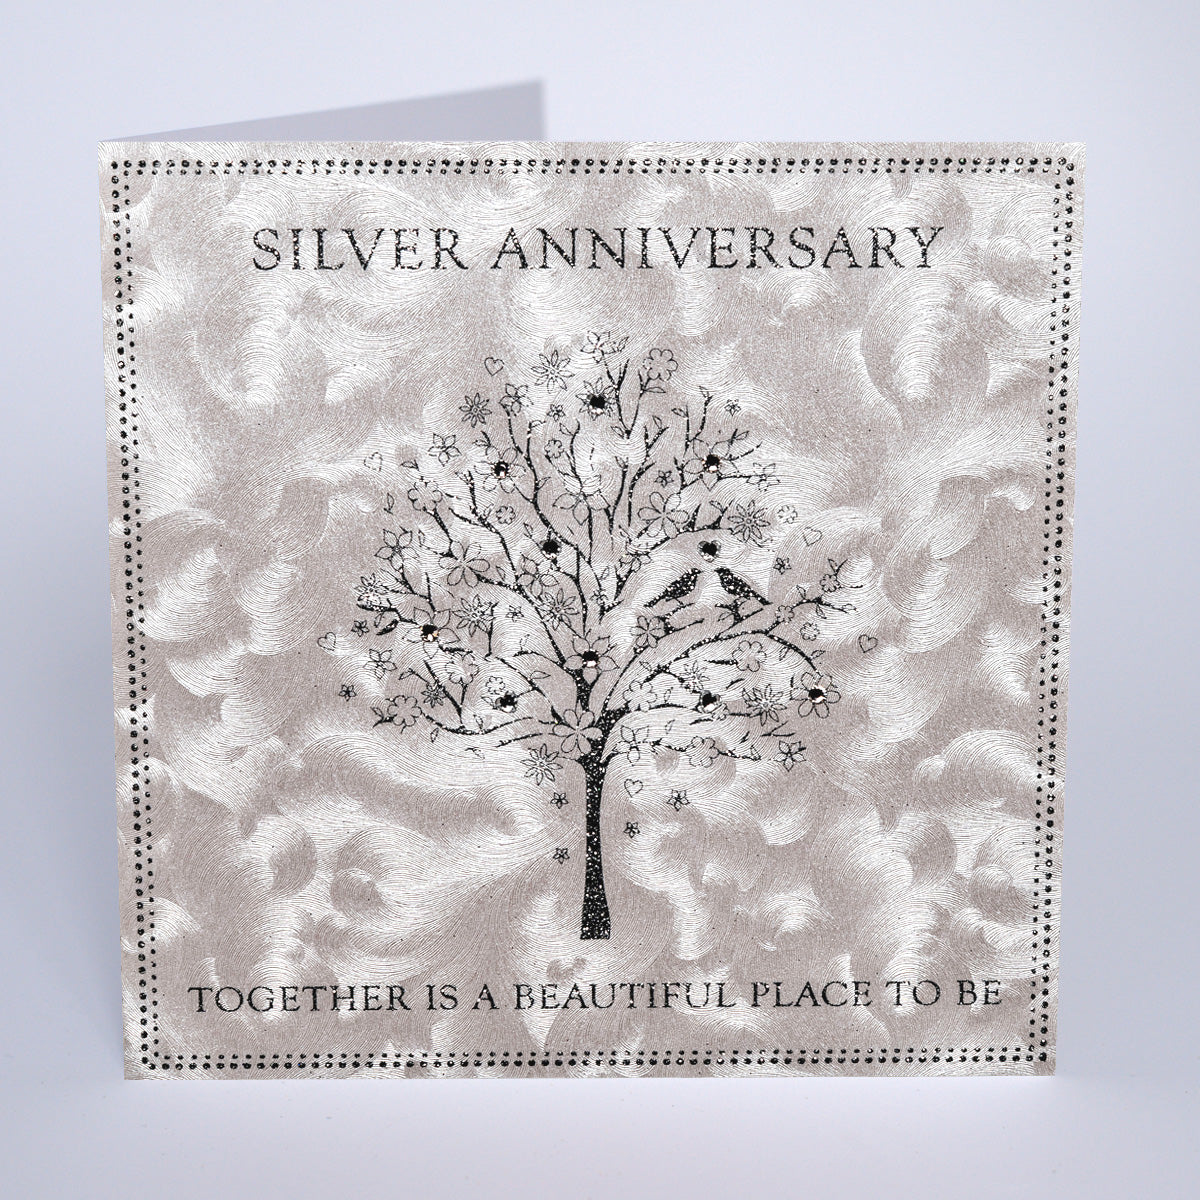 Silver Anniversary - Together is a Beautiful Place to Be